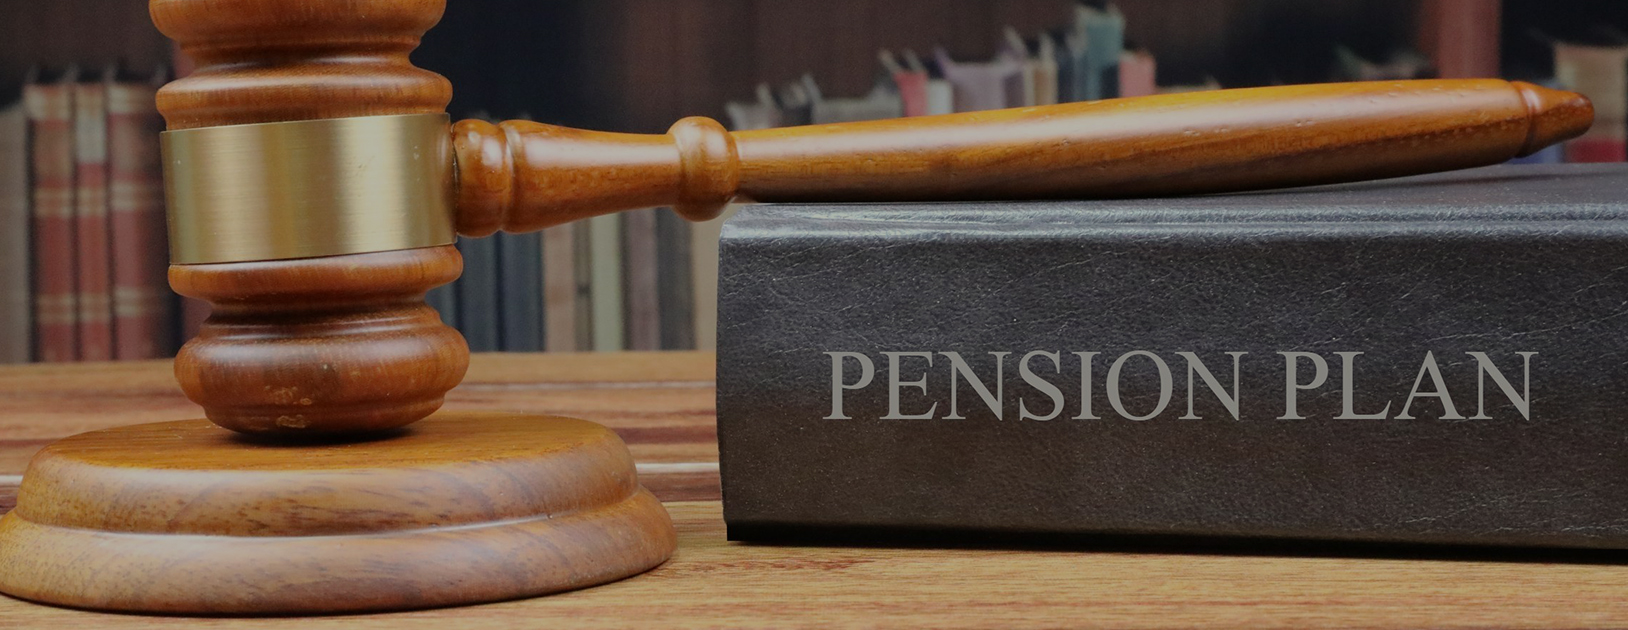 Which Law Regulates Private Pension Funds?